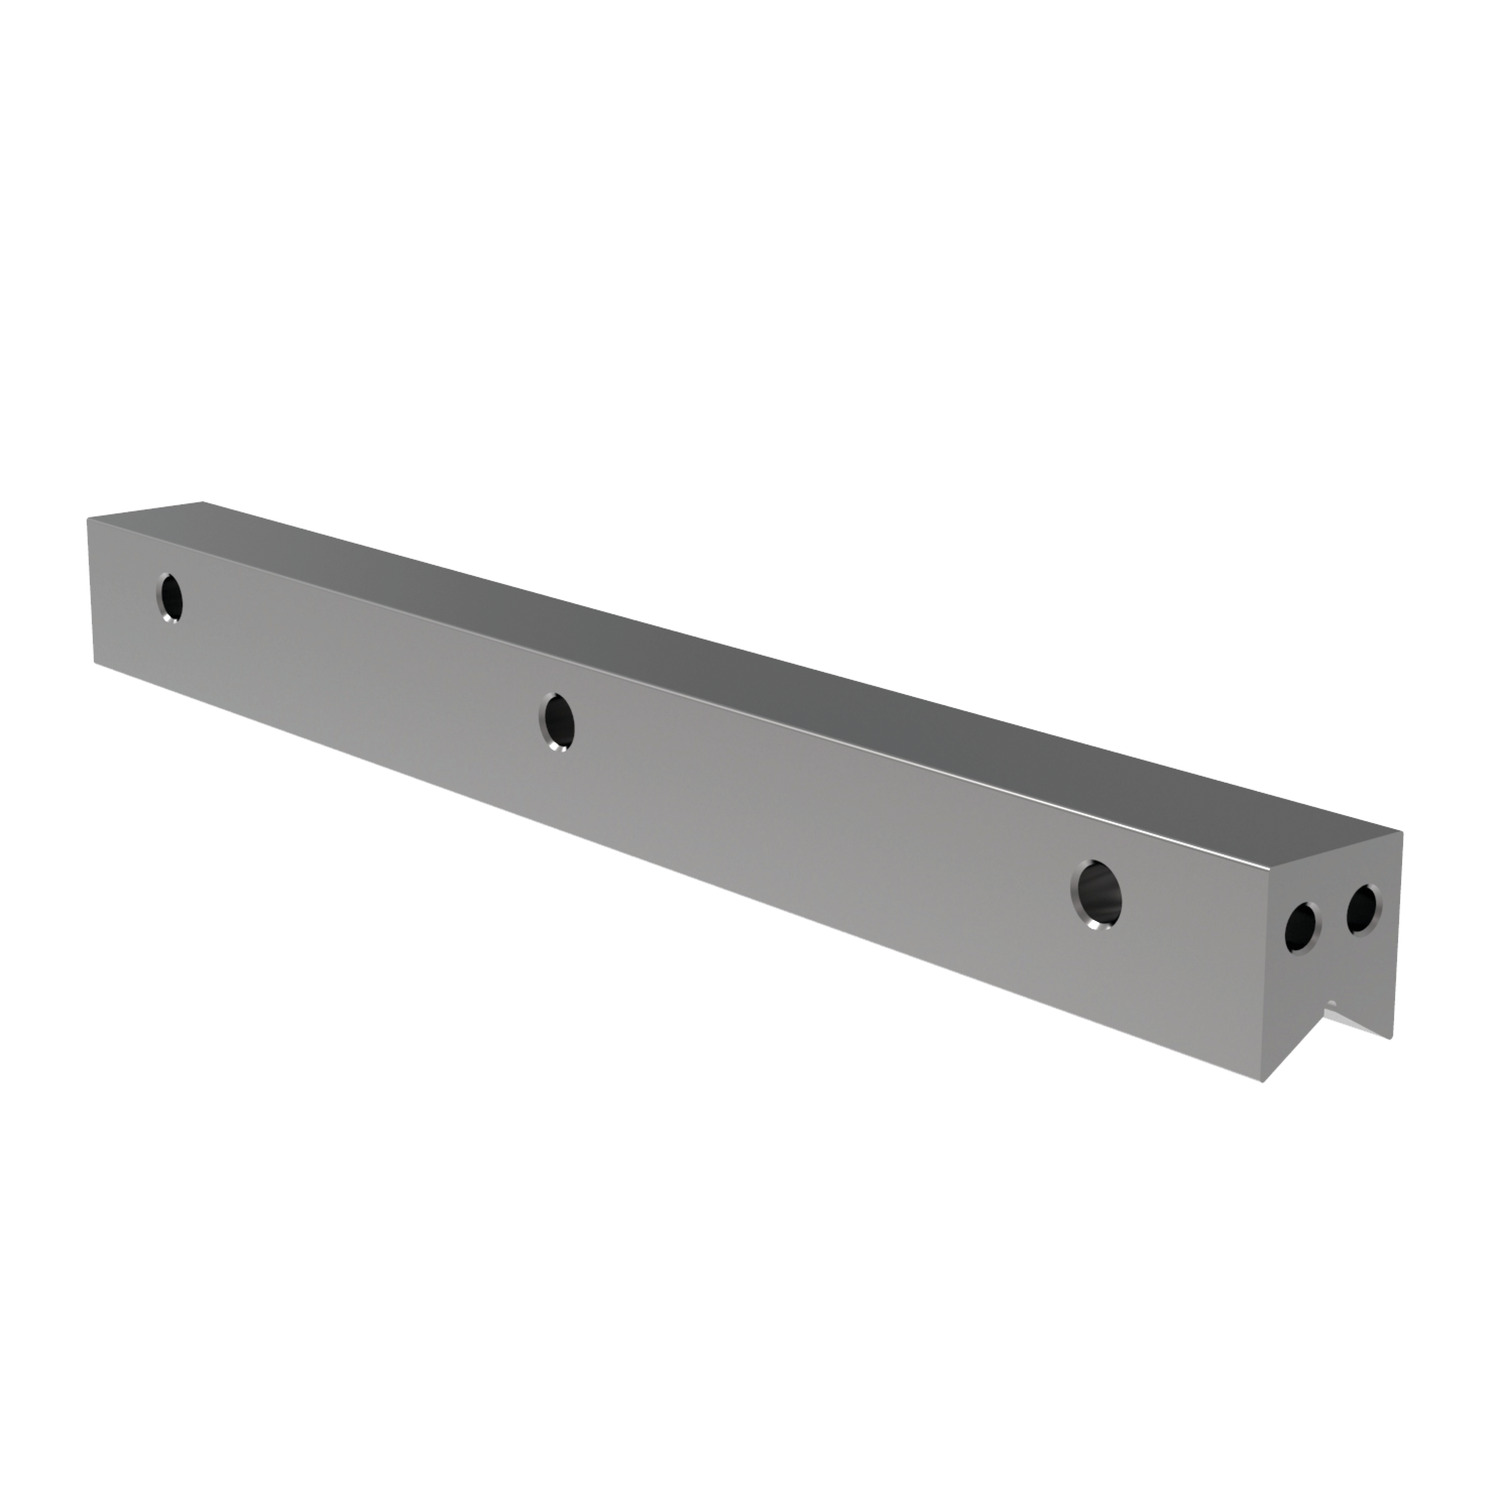 Needle Roller Rail Sets When used with the corresponding V rail and rollers, these Roller Rails can provide linear motion and support heavy-duty loads.